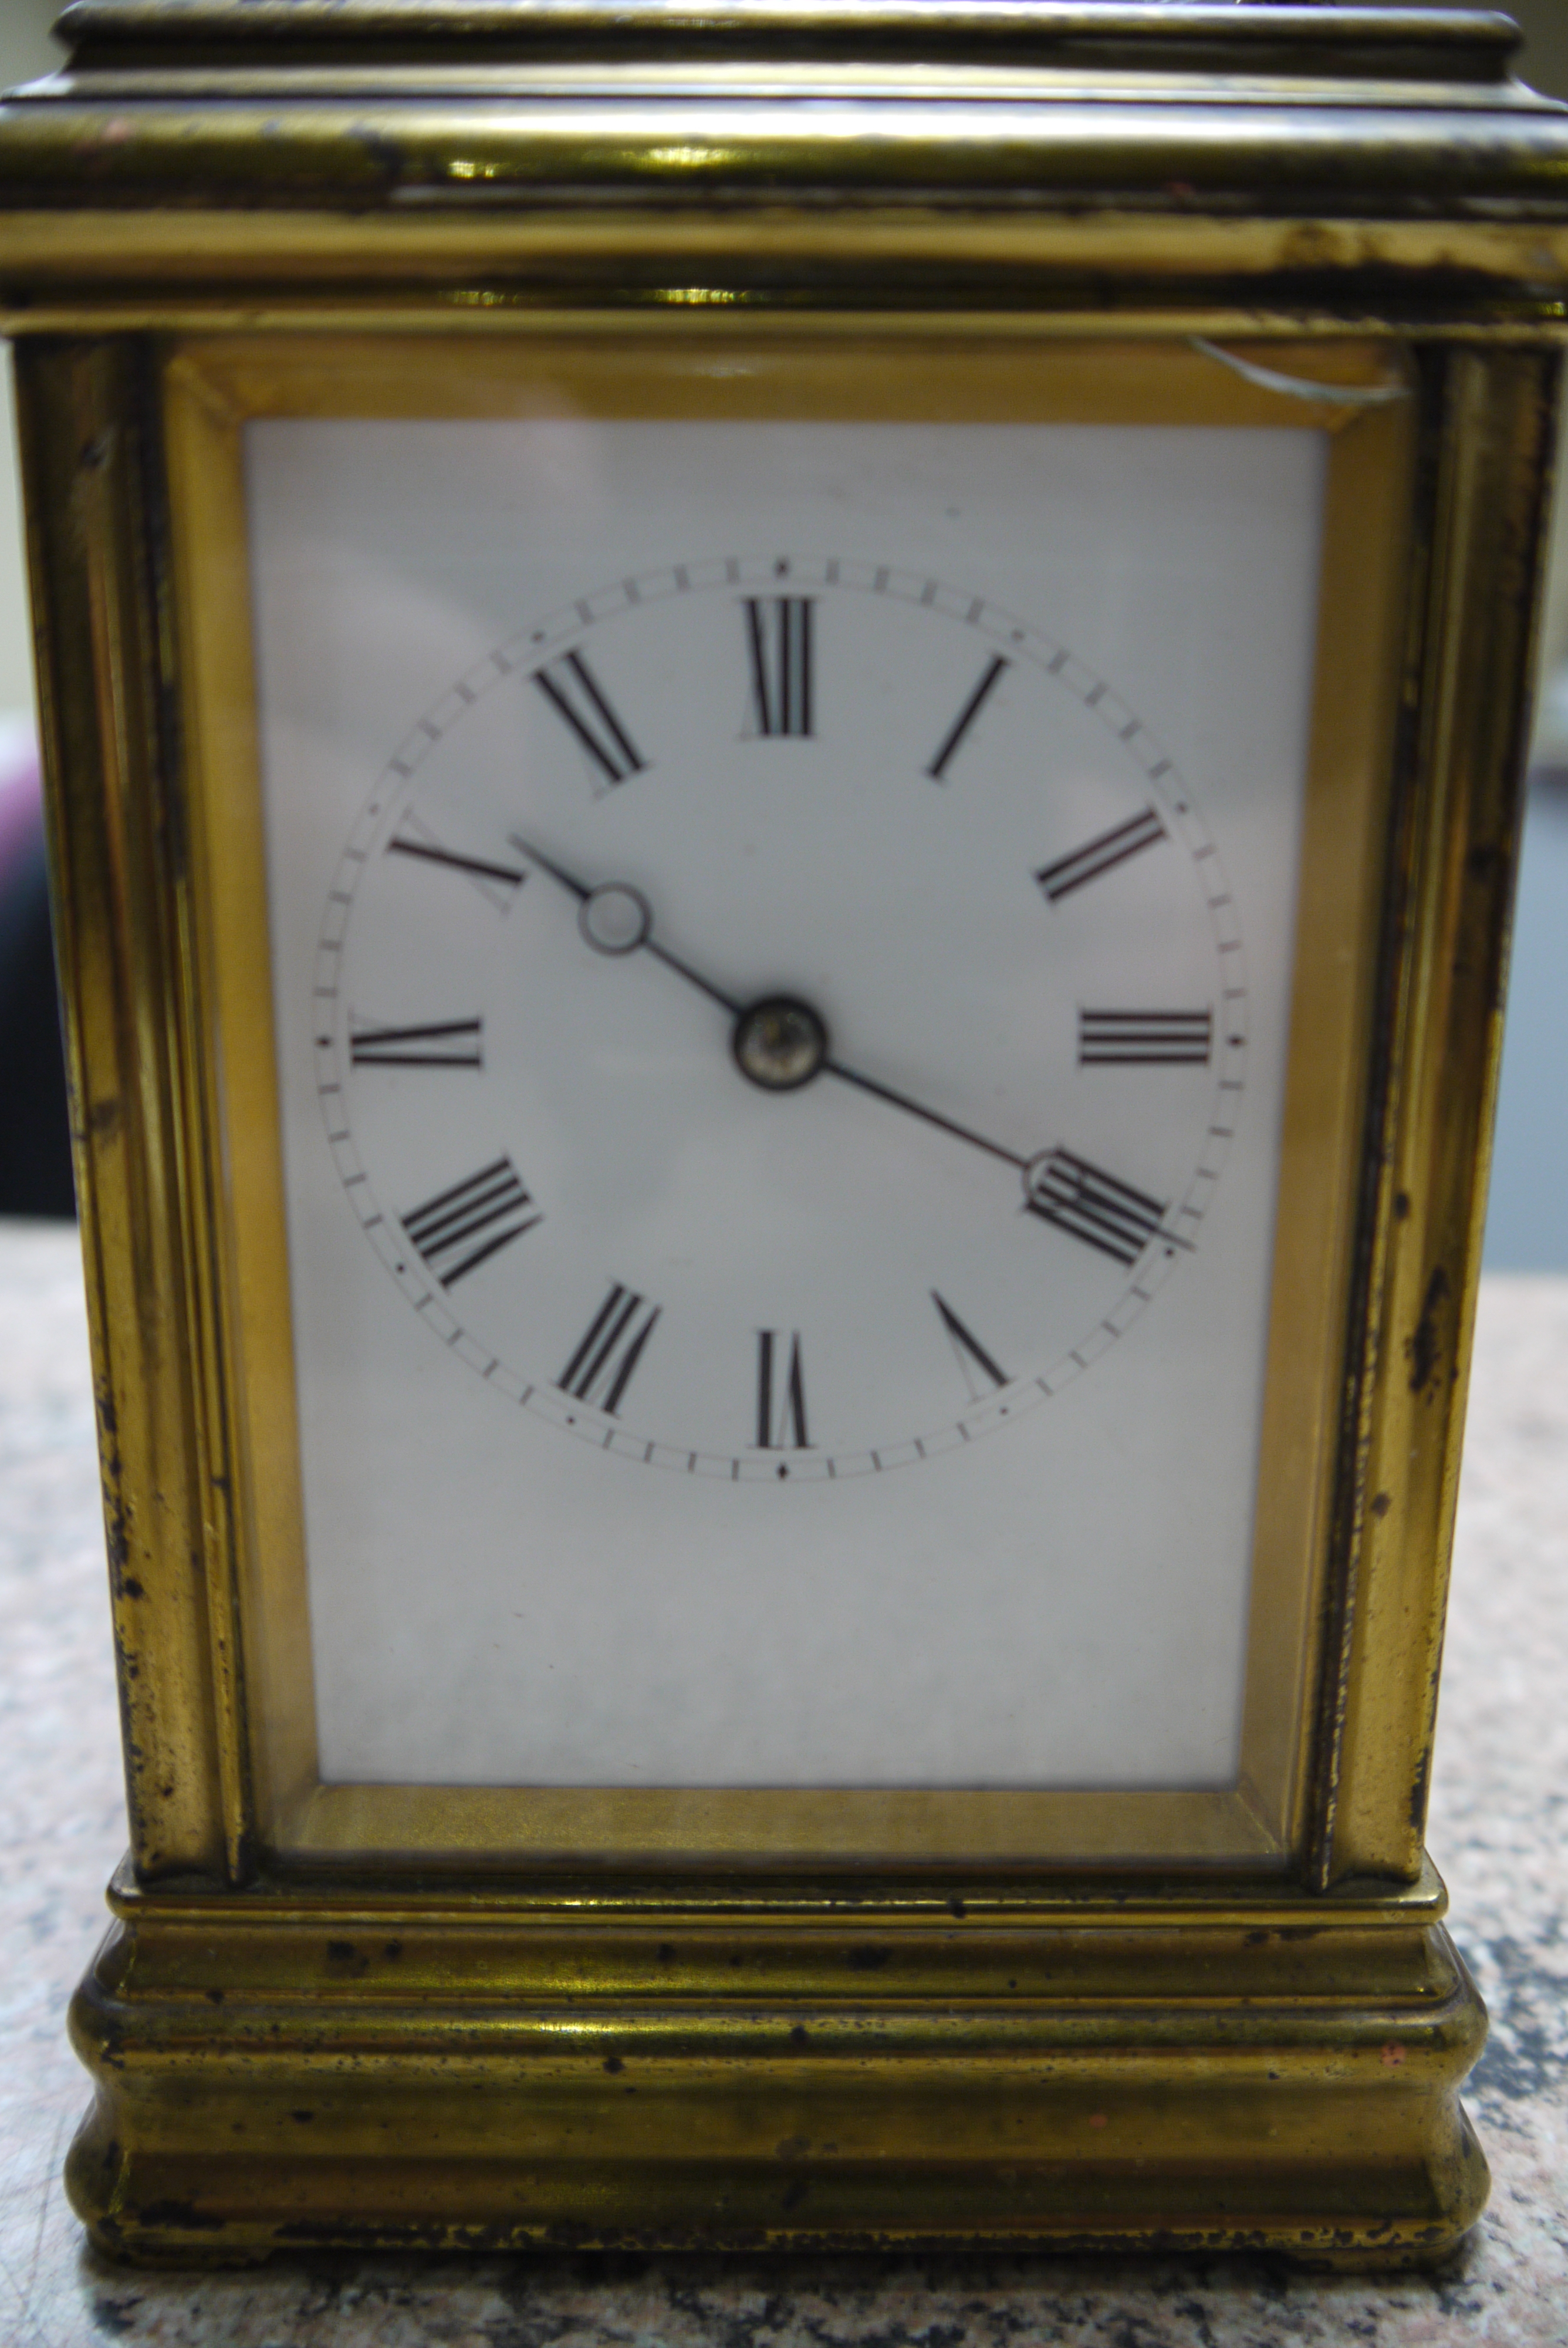 A LATE 19TH CENTURY FRENCH TWO TRAIN CARRIAGE CLOCK WITH ALARUM MOVEMENT, - Image 7 of 8